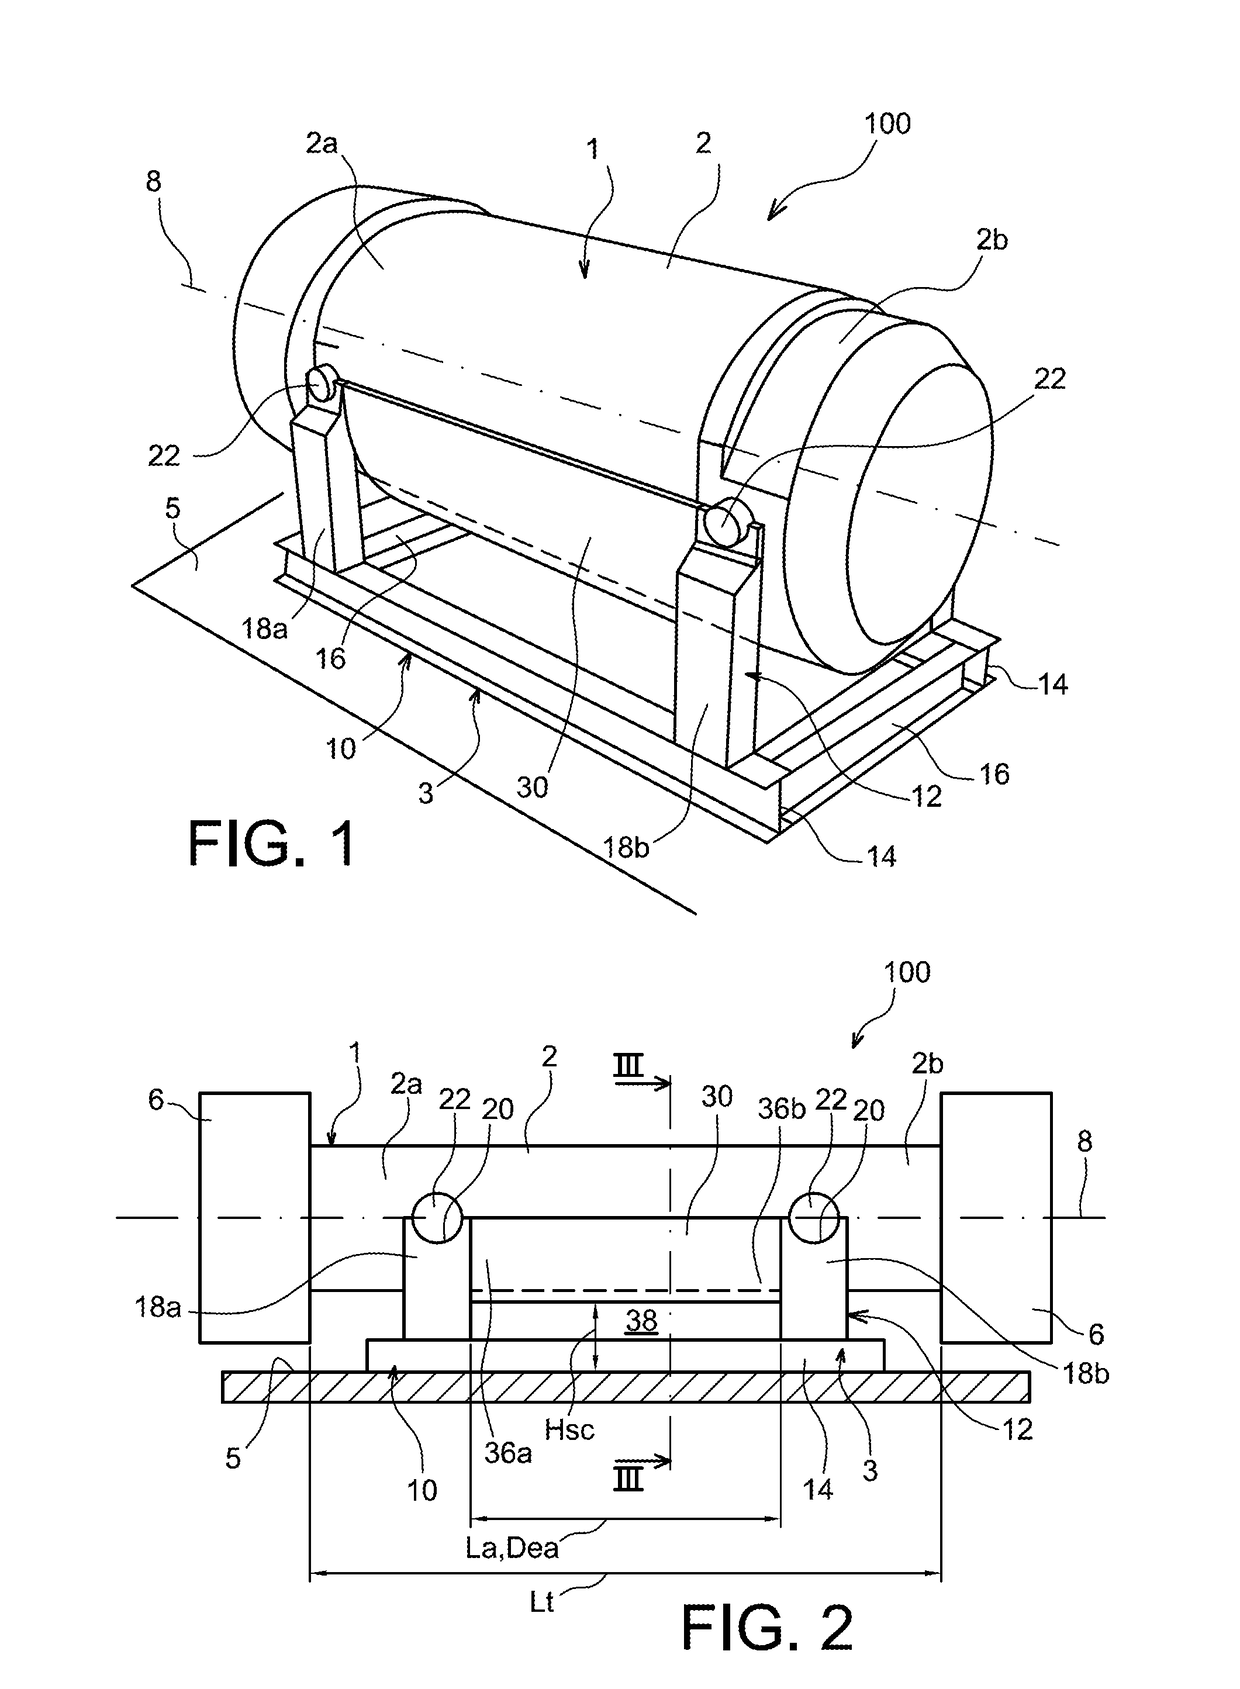 Device for supporting packaging for transporting/storing radioactive materials, including a shroud for guiding air for cooling the packaging by natural convection